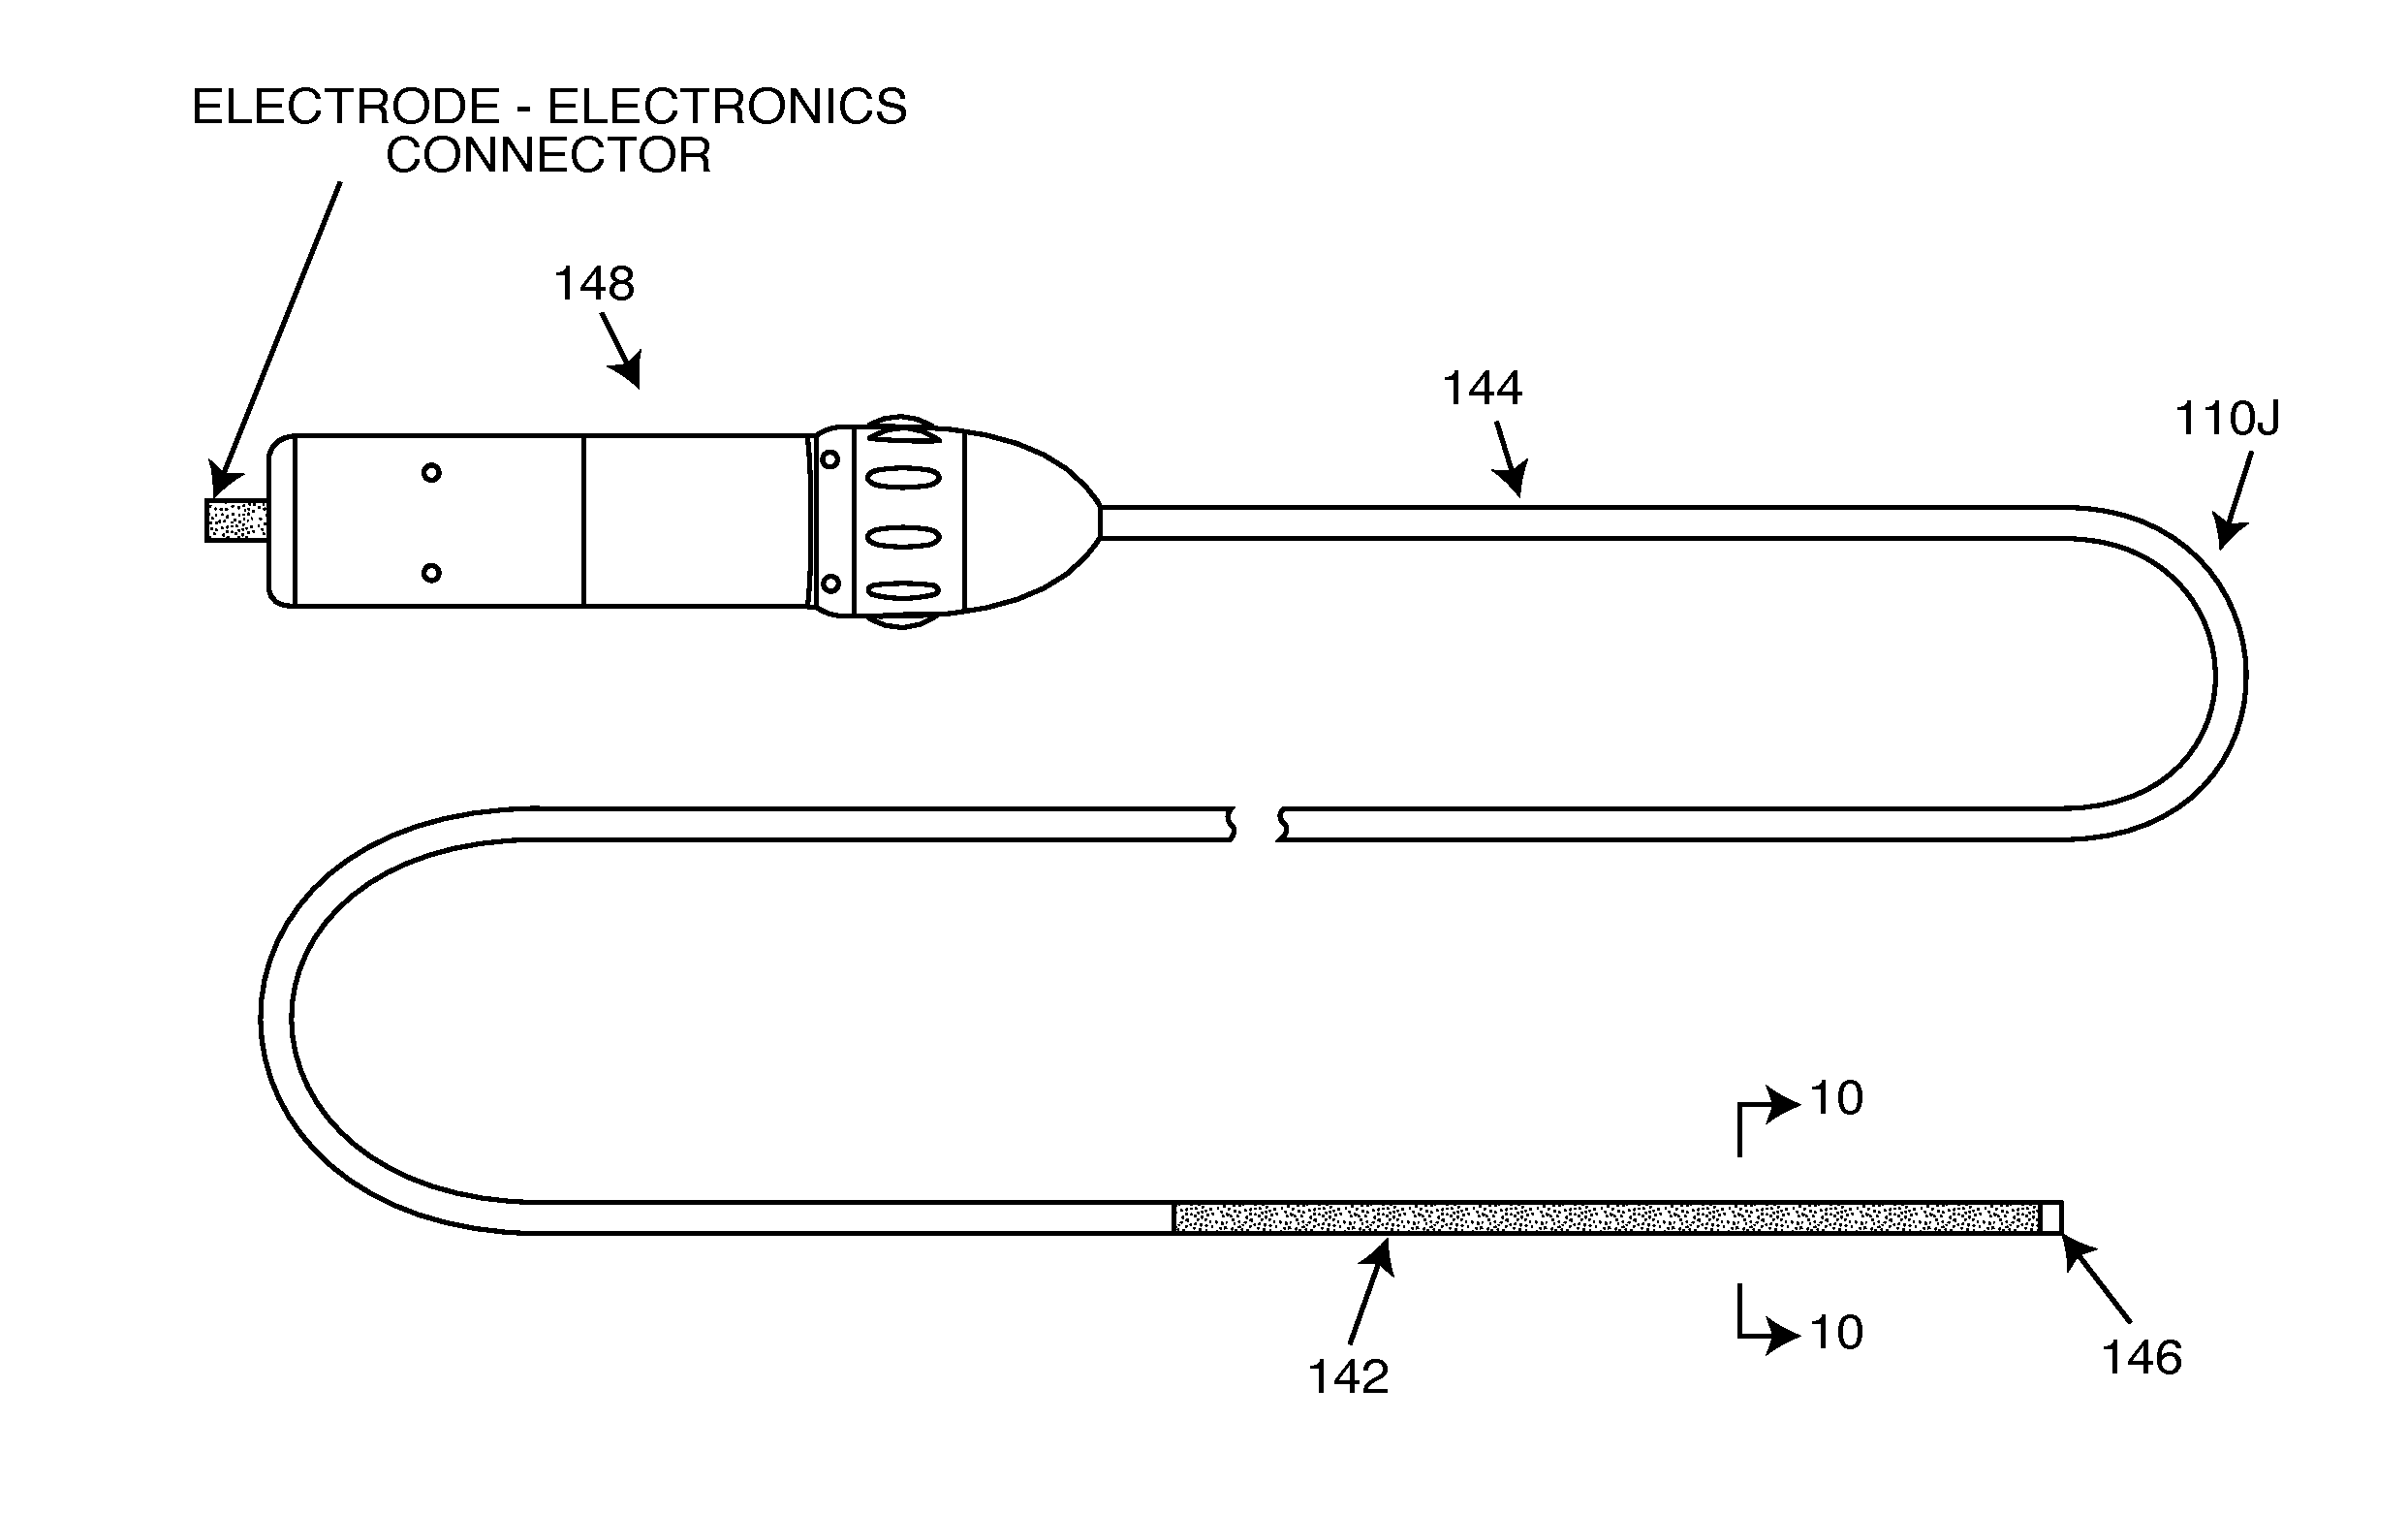 Implantable lead for an active medical device having an inductor design minimizing eddy current losses